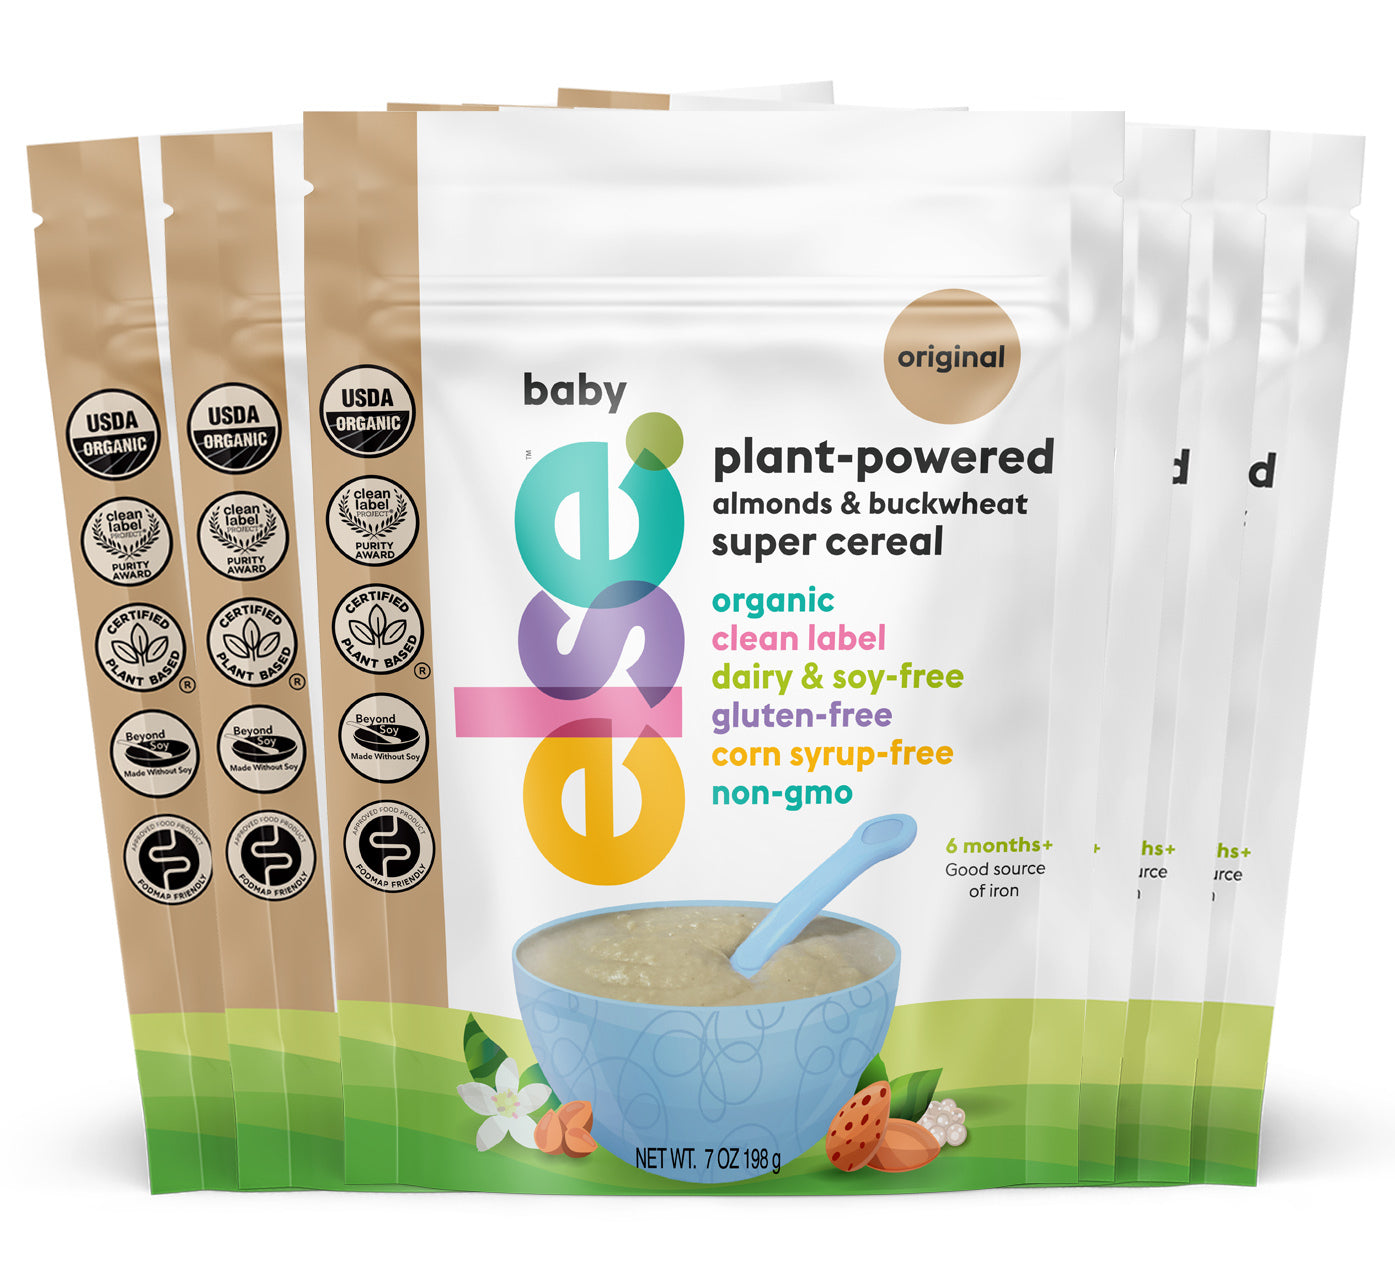 This New Service Ships Organic Baby Food To You